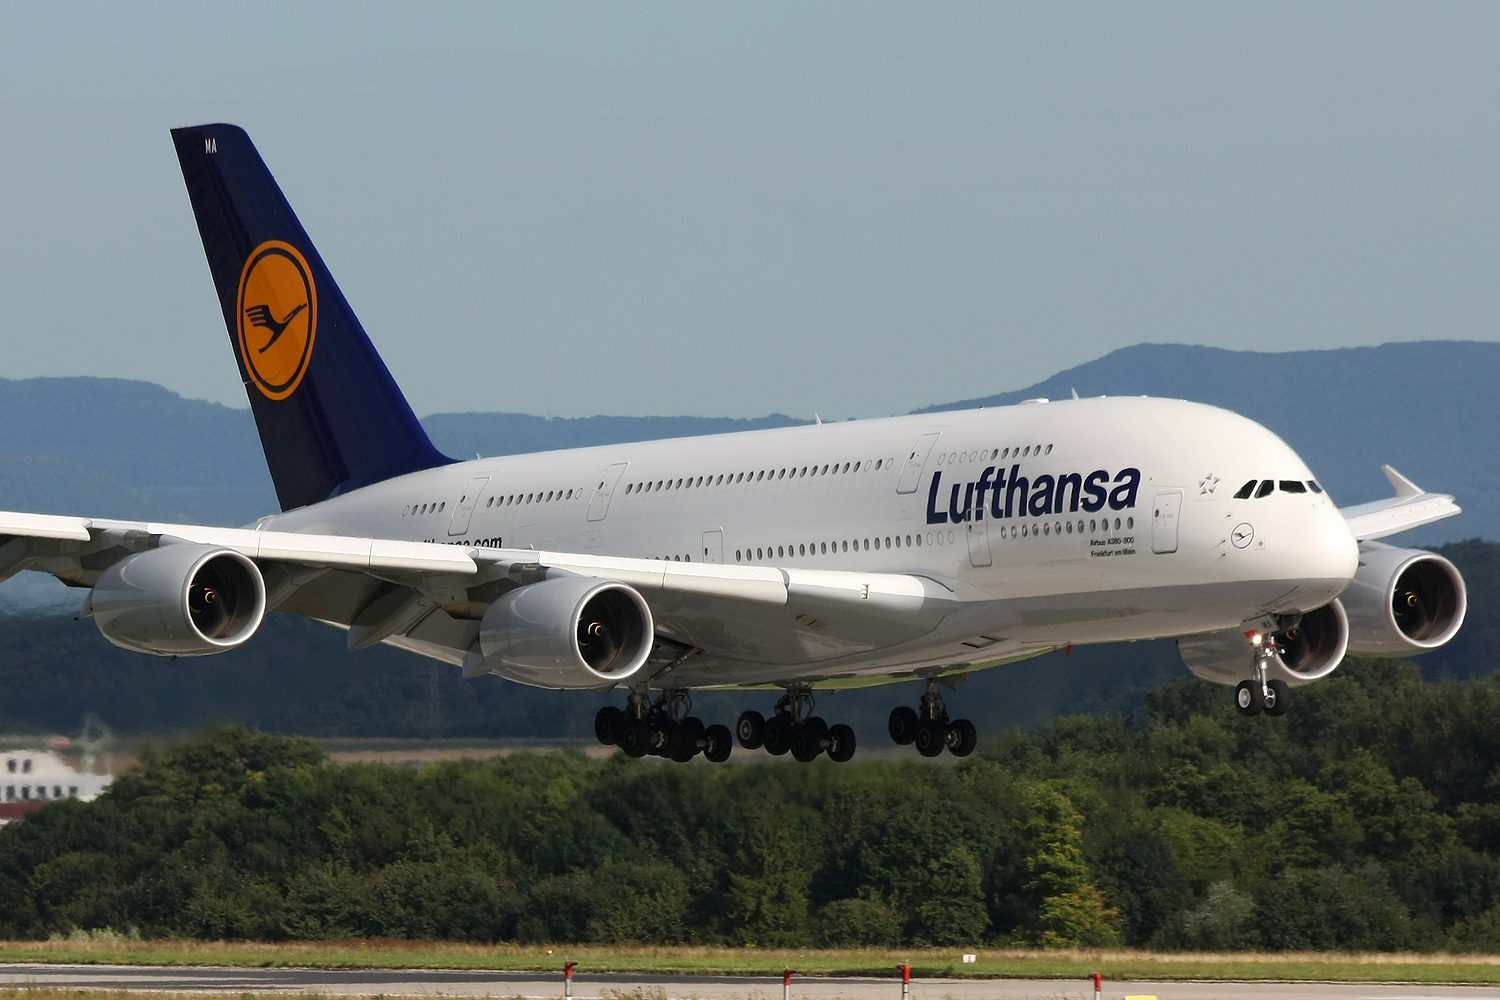 UPDATE 1-Europe gives up gains as earnings disappointments from Lufthansa, BNP Paribas weigh